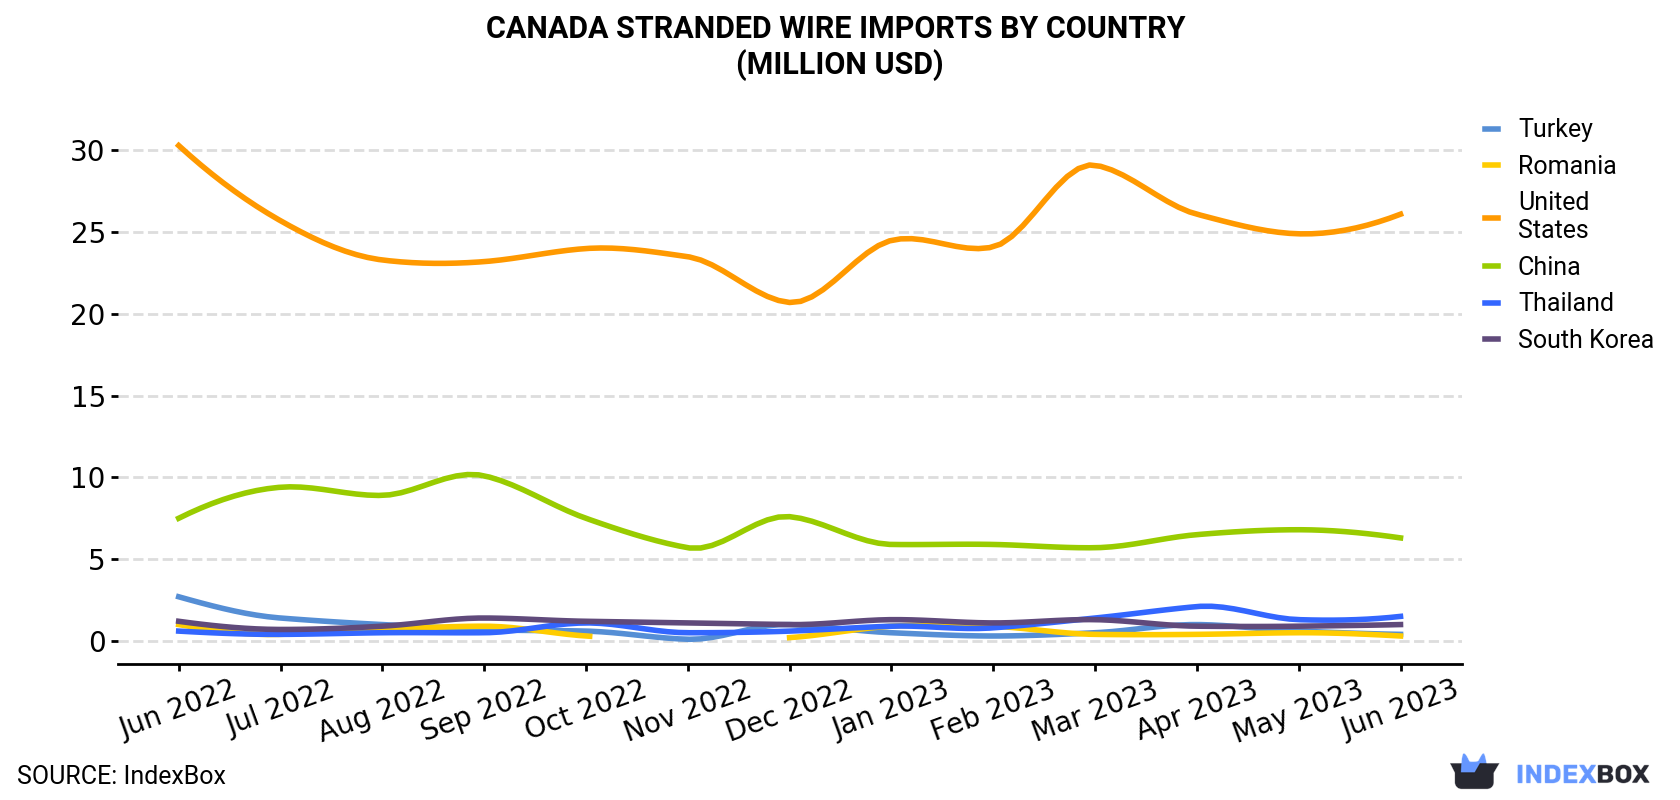 Canada Stranded Wire Imports By Country (Million USD)